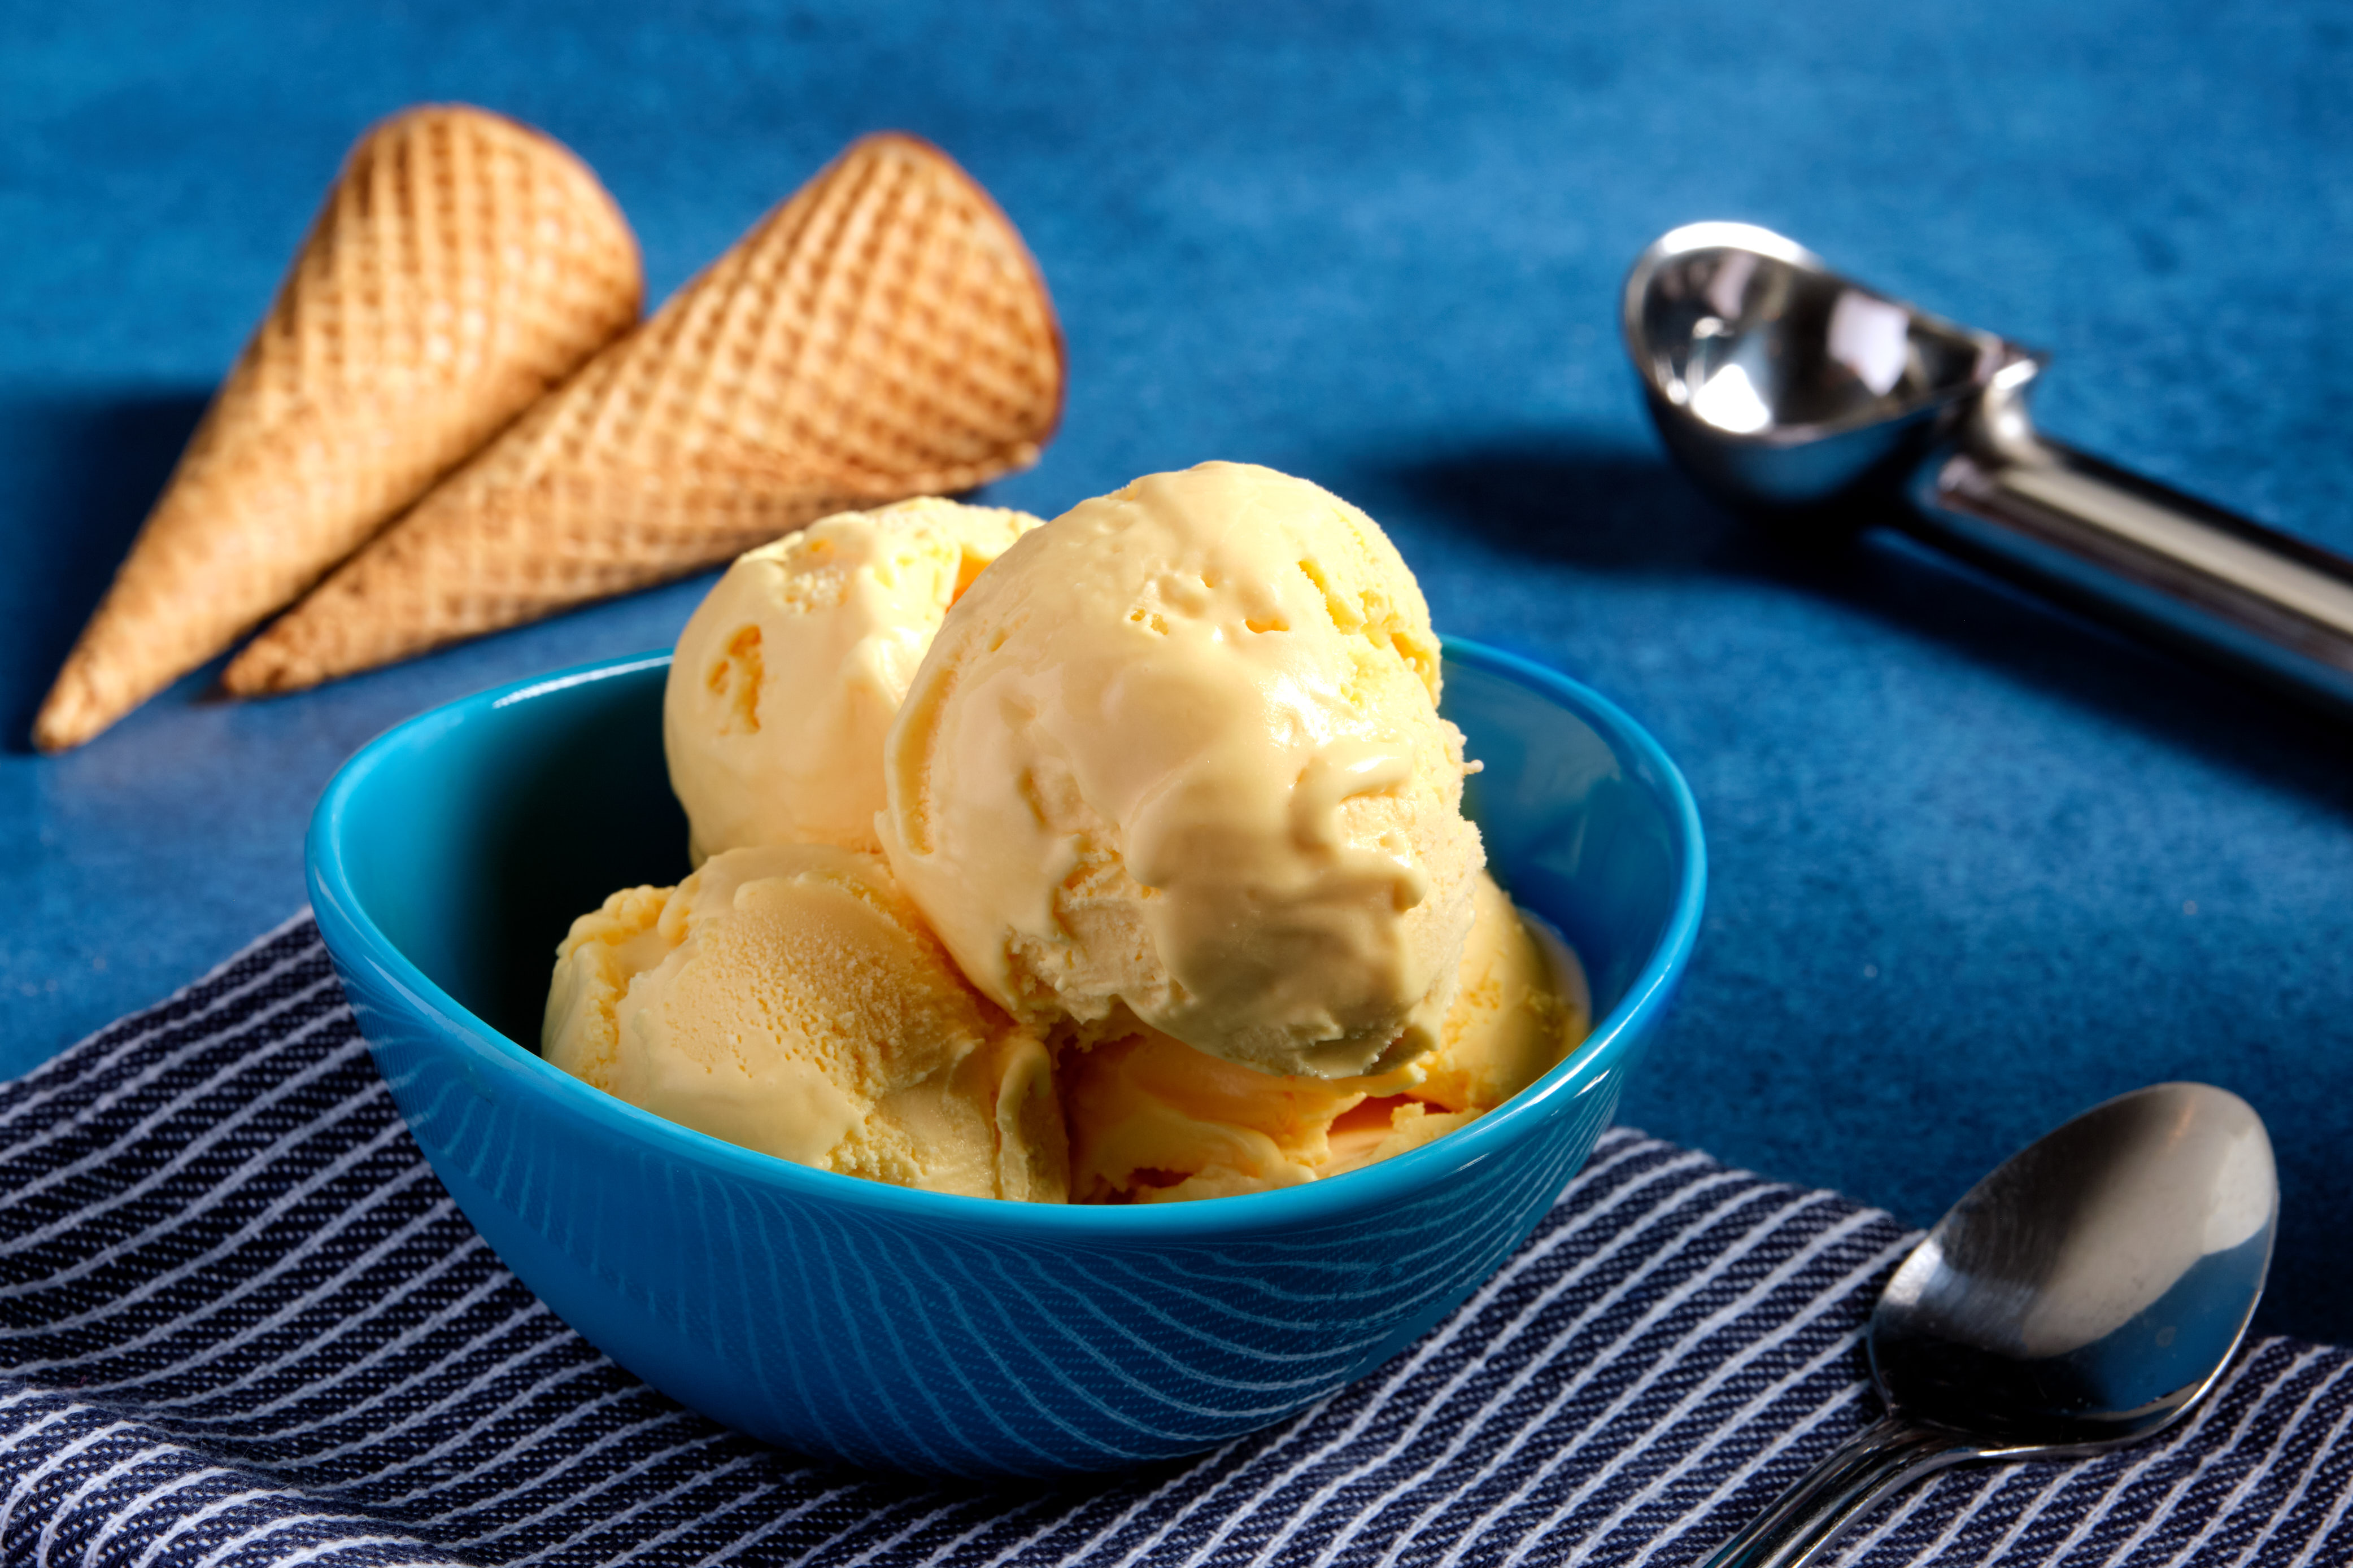 Four scoops of of mac and cheese flavored ice cream in a blue bowl, next to an ice cream scoop and two cones.